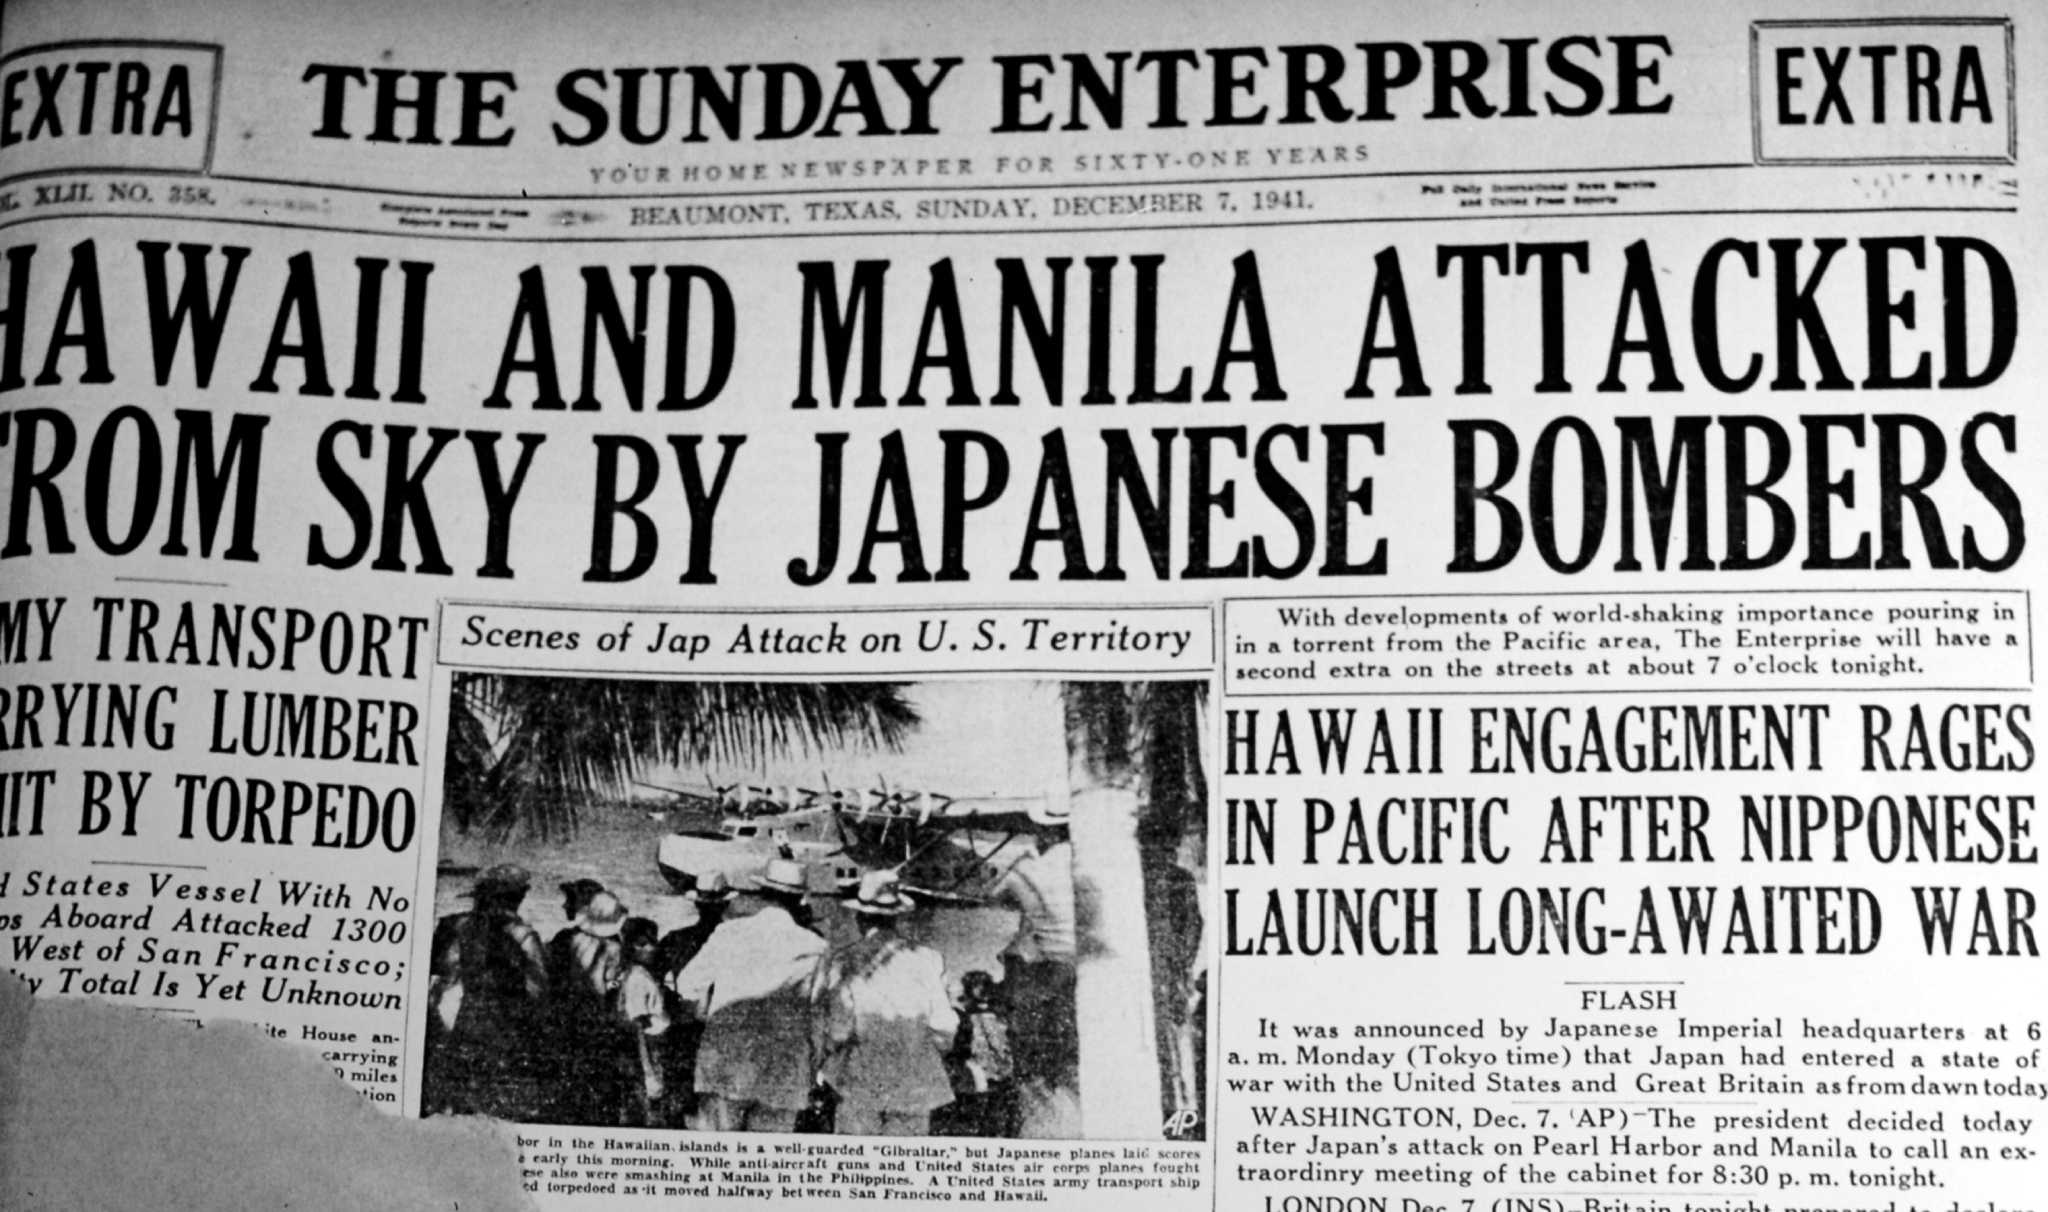 Gripping photos show attack at Pearl Harbor